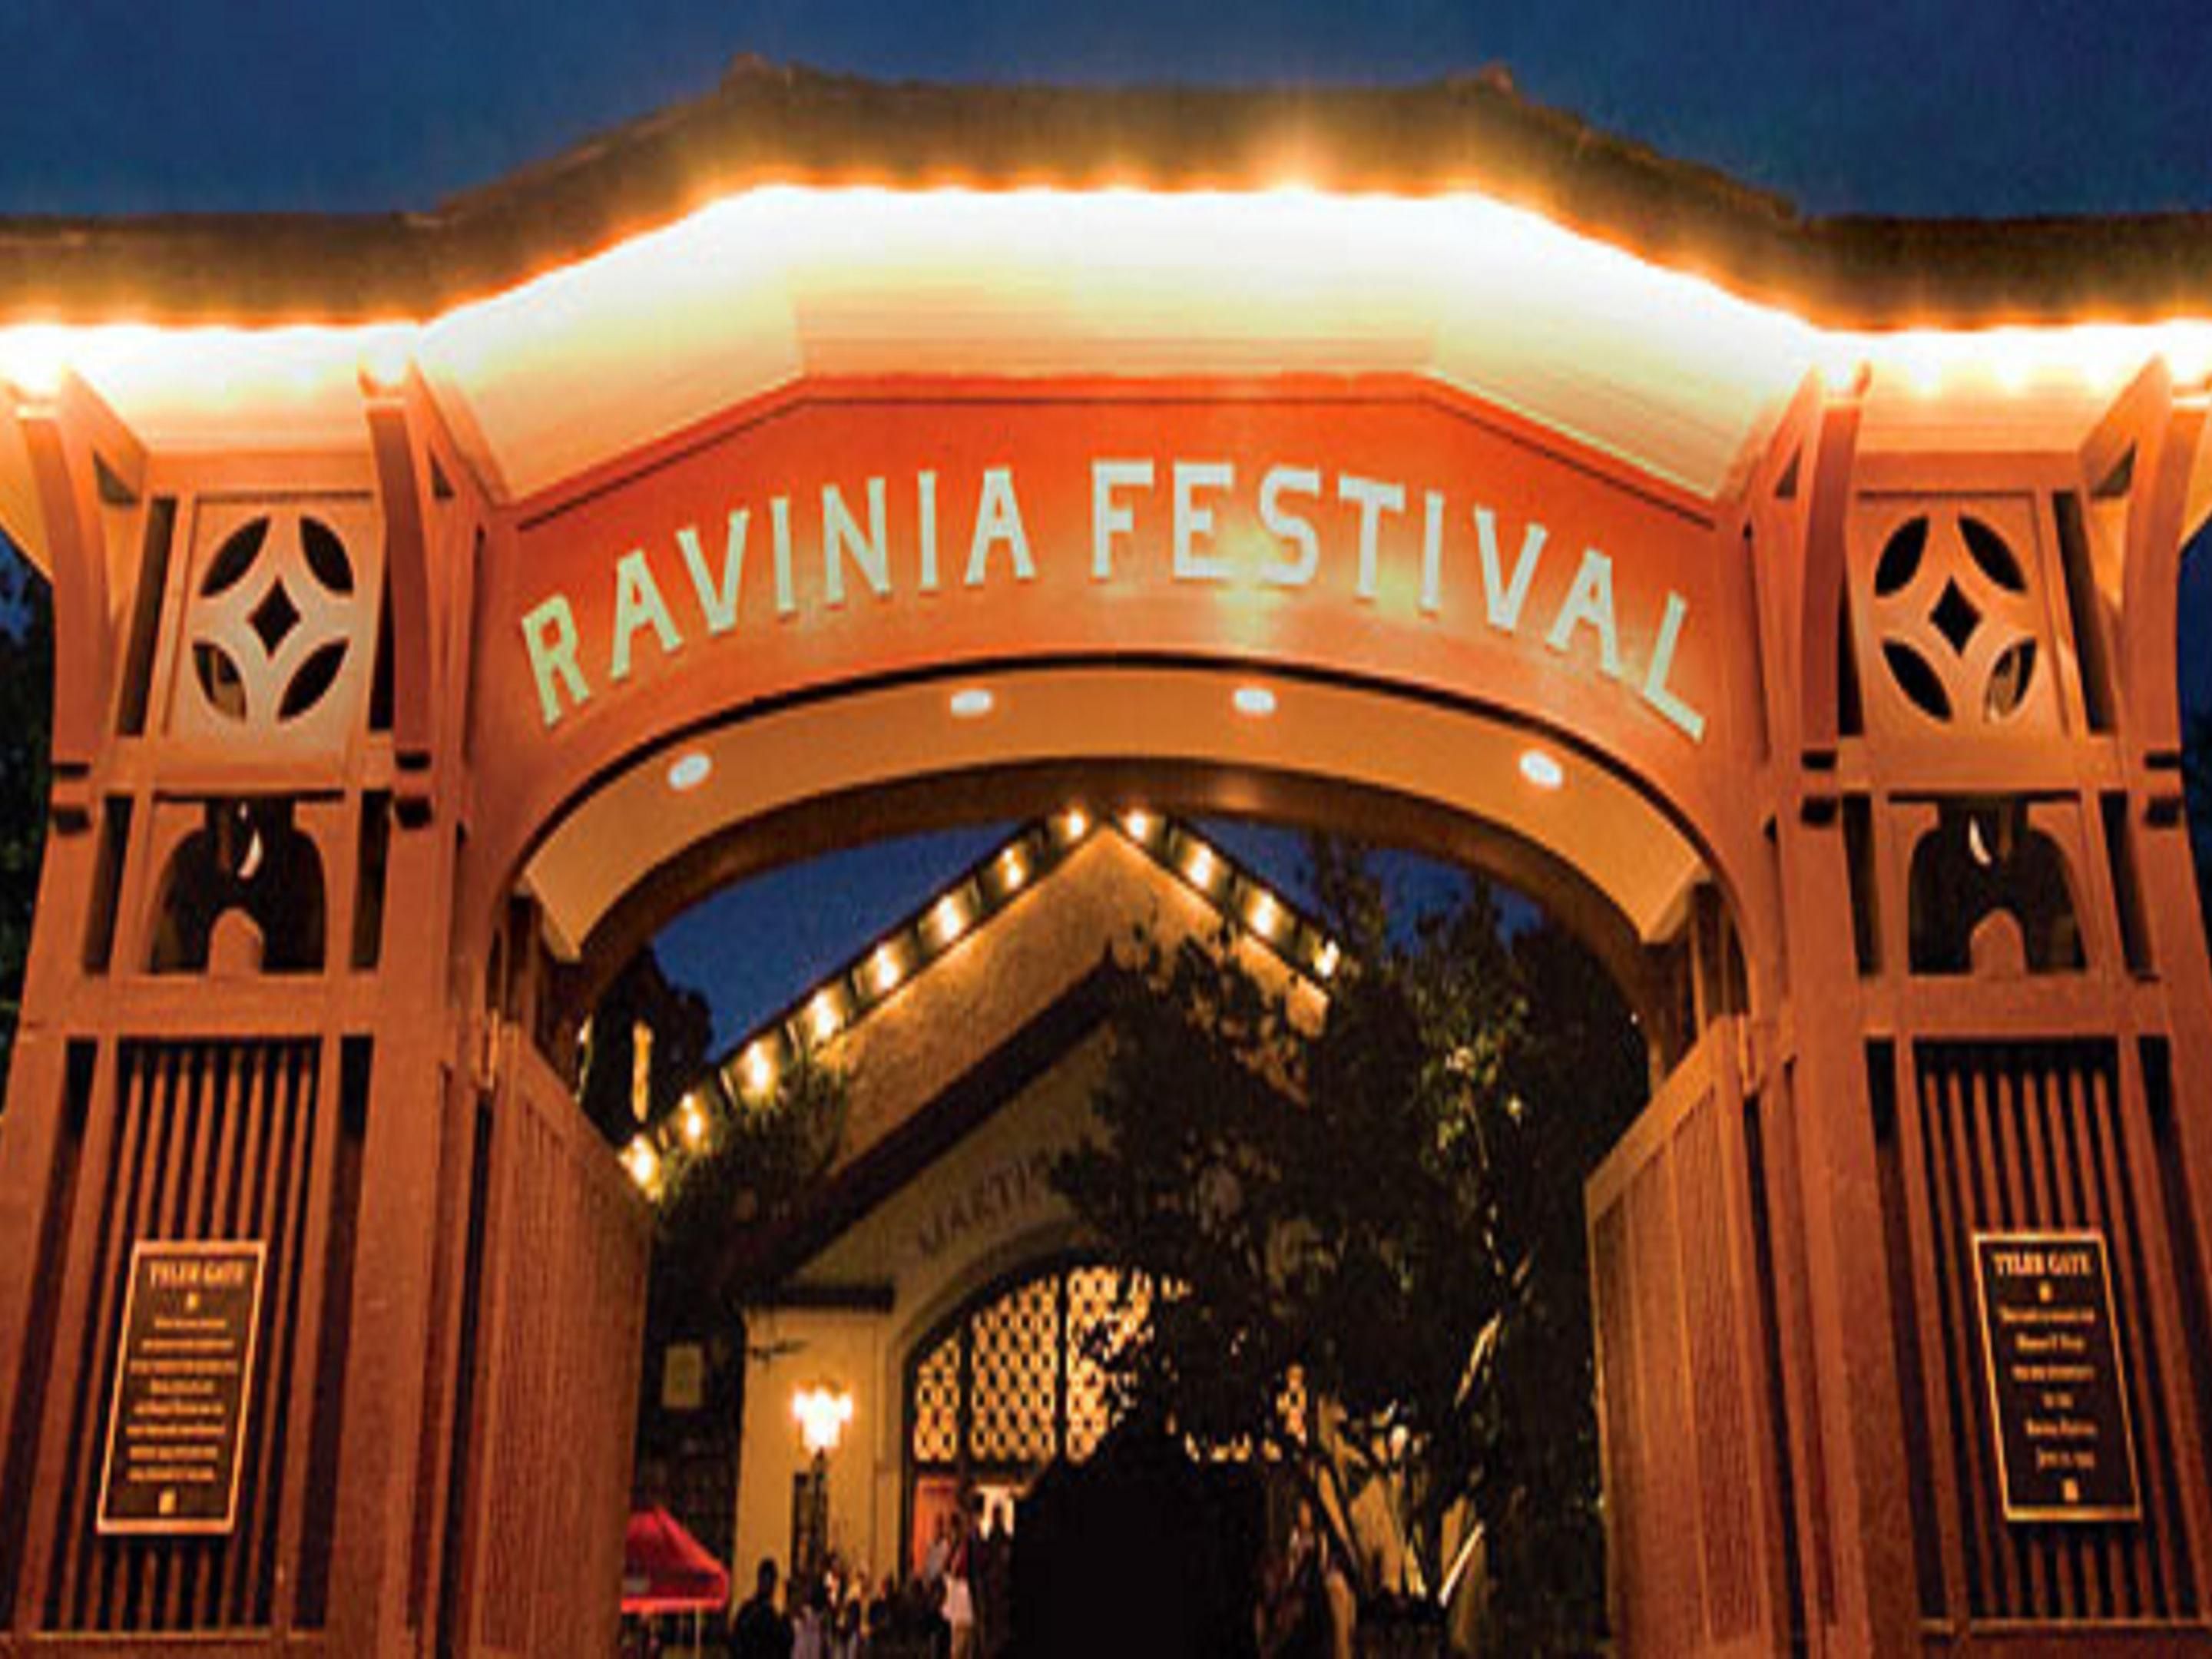 Listen to great live bands at Ravinia Festival